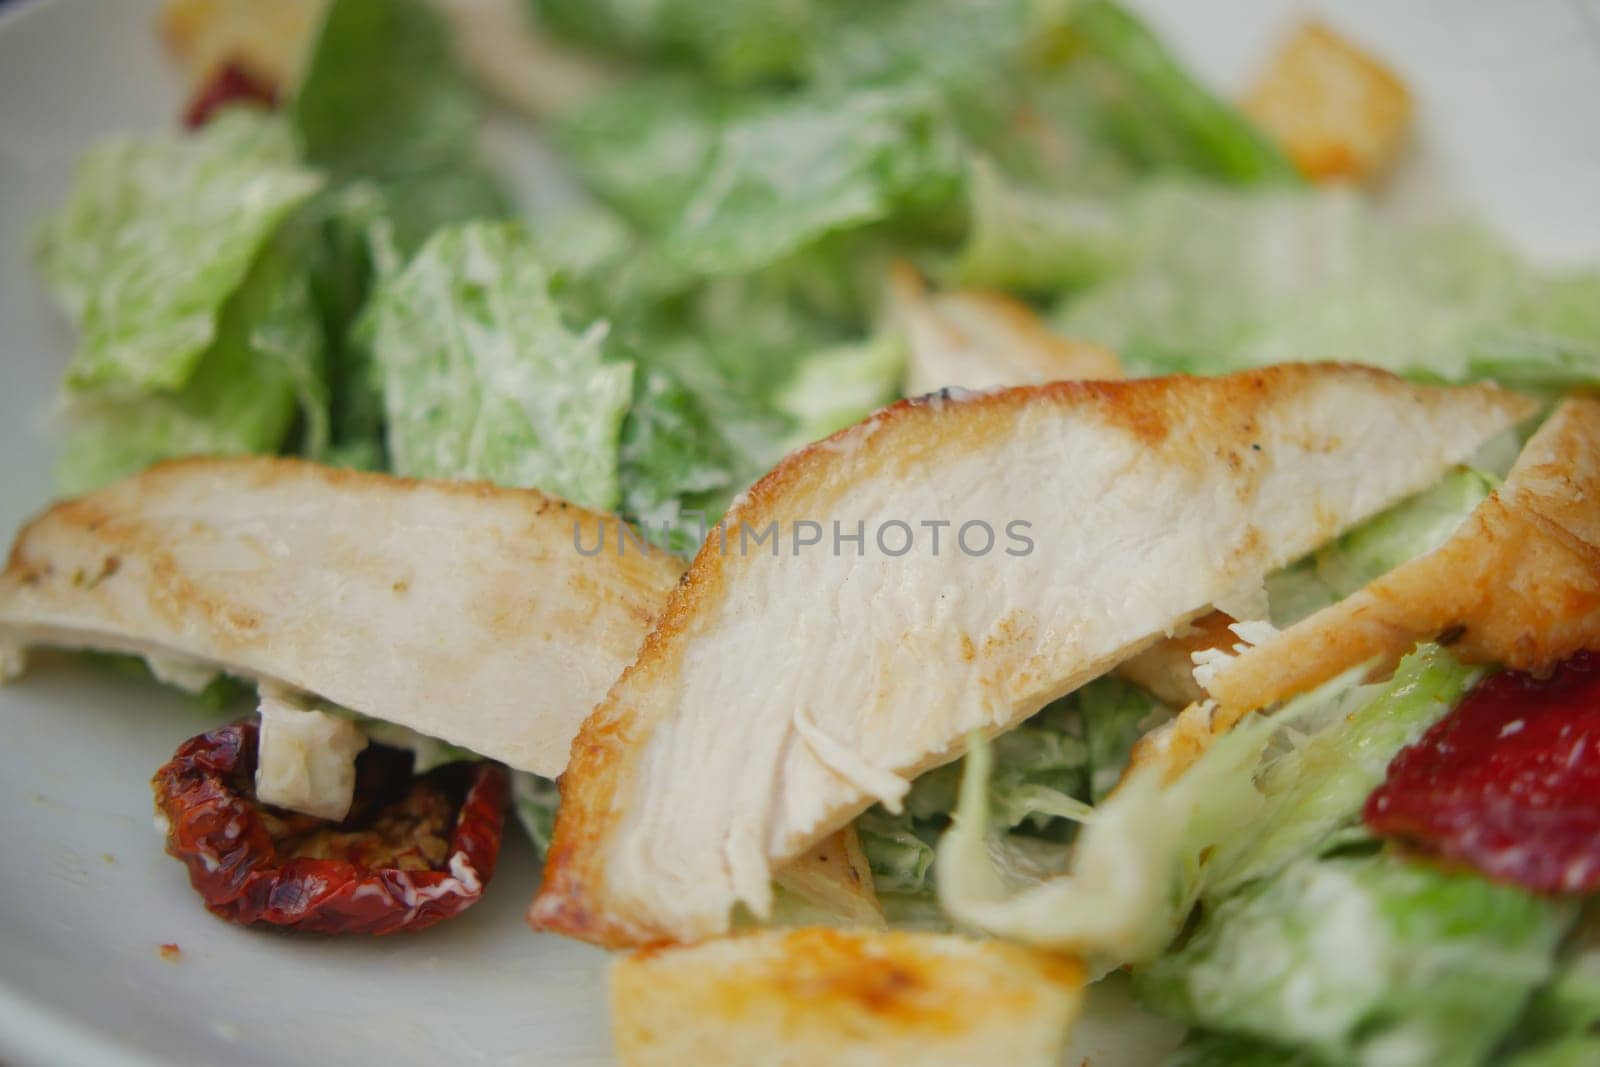 vegetable salad with grilled chicken by towfiq007